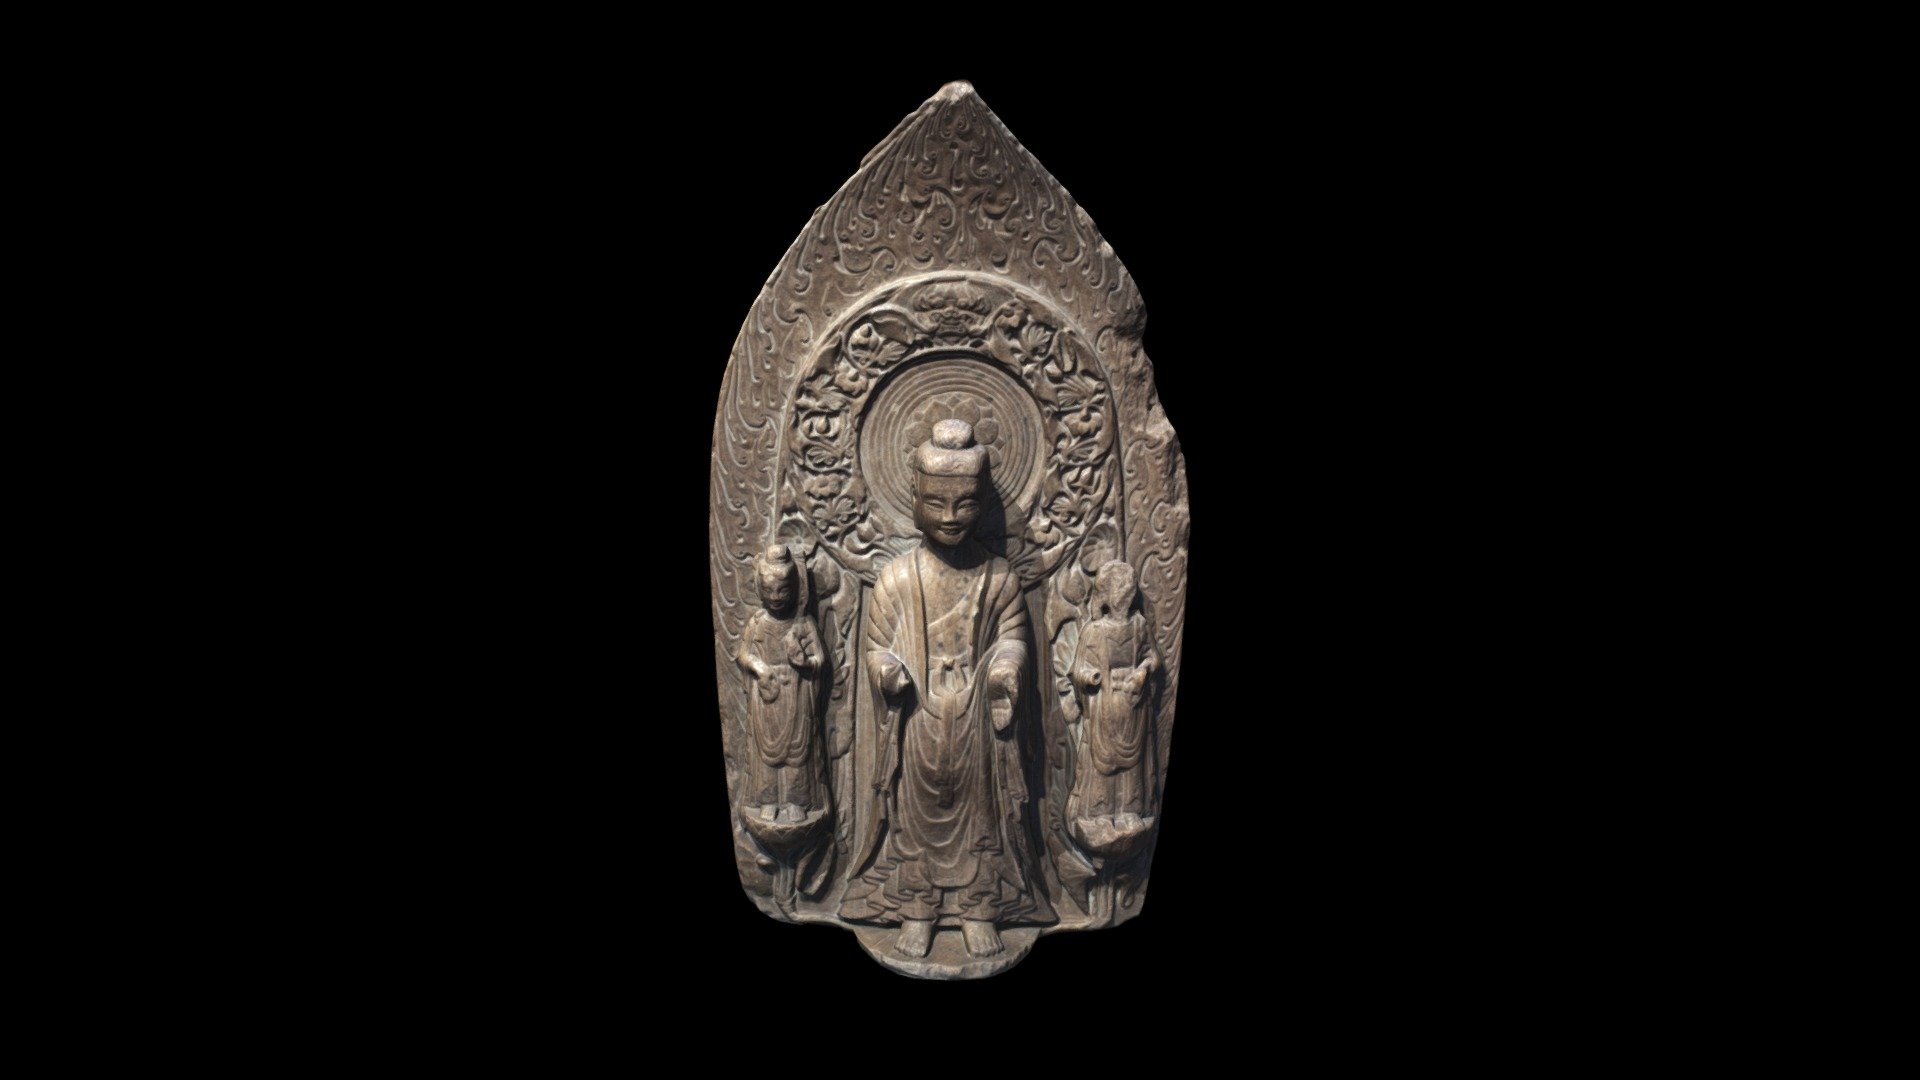 You can copy, modify, and distribute this work, even for commercial purposes, all without asking permission. Learn more about The Cleveland Museum of Art’s Open Access initiative: http://www.clevelandart.org/open-access-faqs

Stele with Sakyamuni and Bodhisattvas, 537. China, Hebei province, Eastern Wei dynasty (534-550). Limestone; overall: 77.5 x 44.4 cm (30 1/2 x 17 1/2 in.). The Cleveland Museum of Art, Gift of the John Huntington Art and Polytechnic Trust 1914.567

Learn more on The Cleveland Museum of Art’s Collection Online: https://www.clevelandart.org/art/1914.567 

Model created by Dale Utt: https://sketchfab.com/turbulentorbit - 1914.567 Stele with Sakyamuni and Bodhisattvas - Download Free 3D model by Cleveland Museum of Art (@clevelandart) 3d model